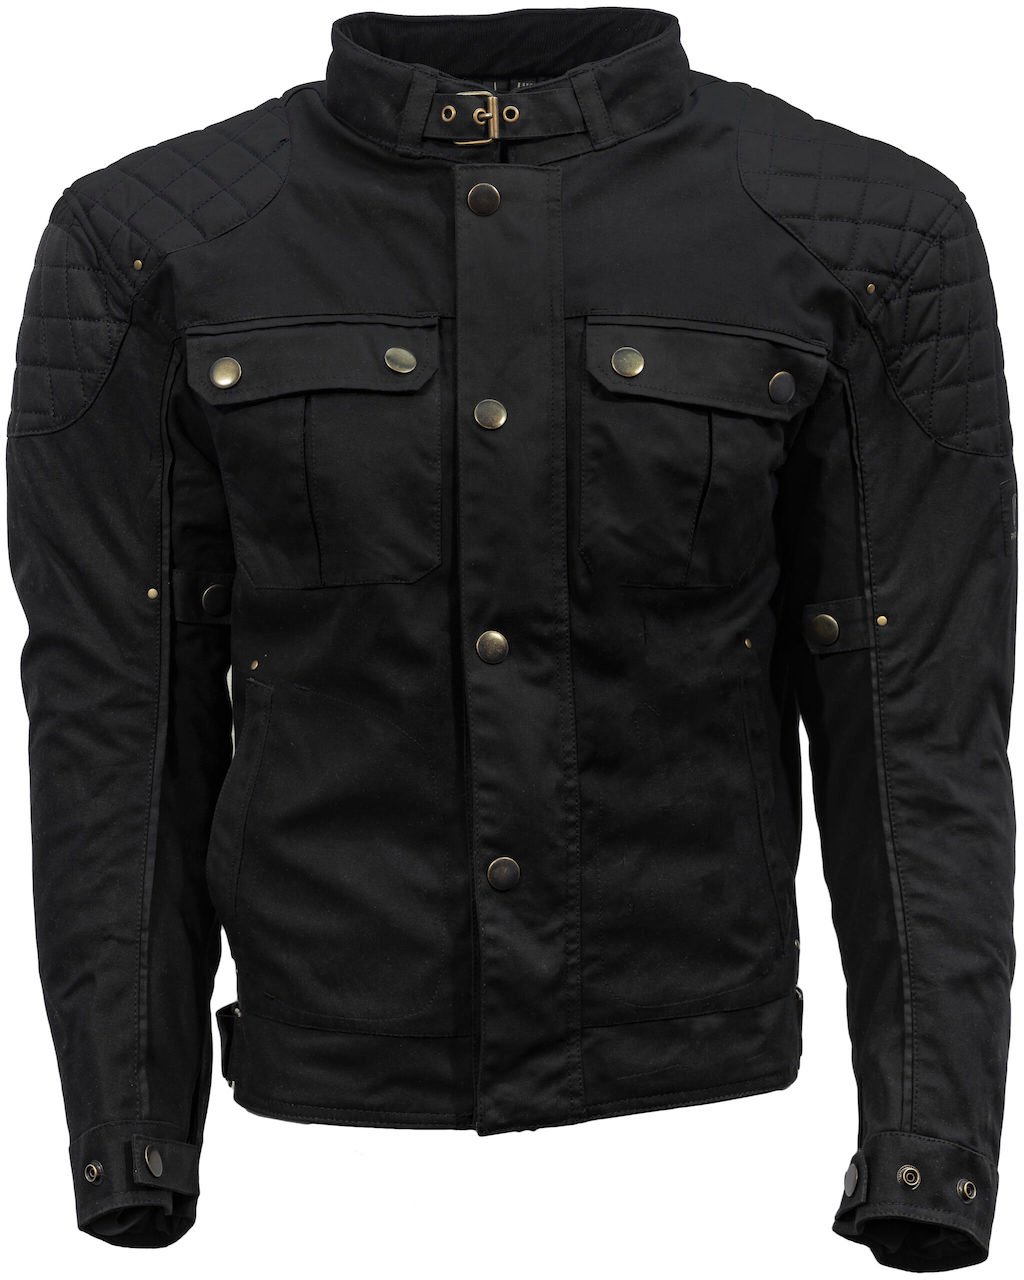 What's the best wax motorcycle jacket that money can buy